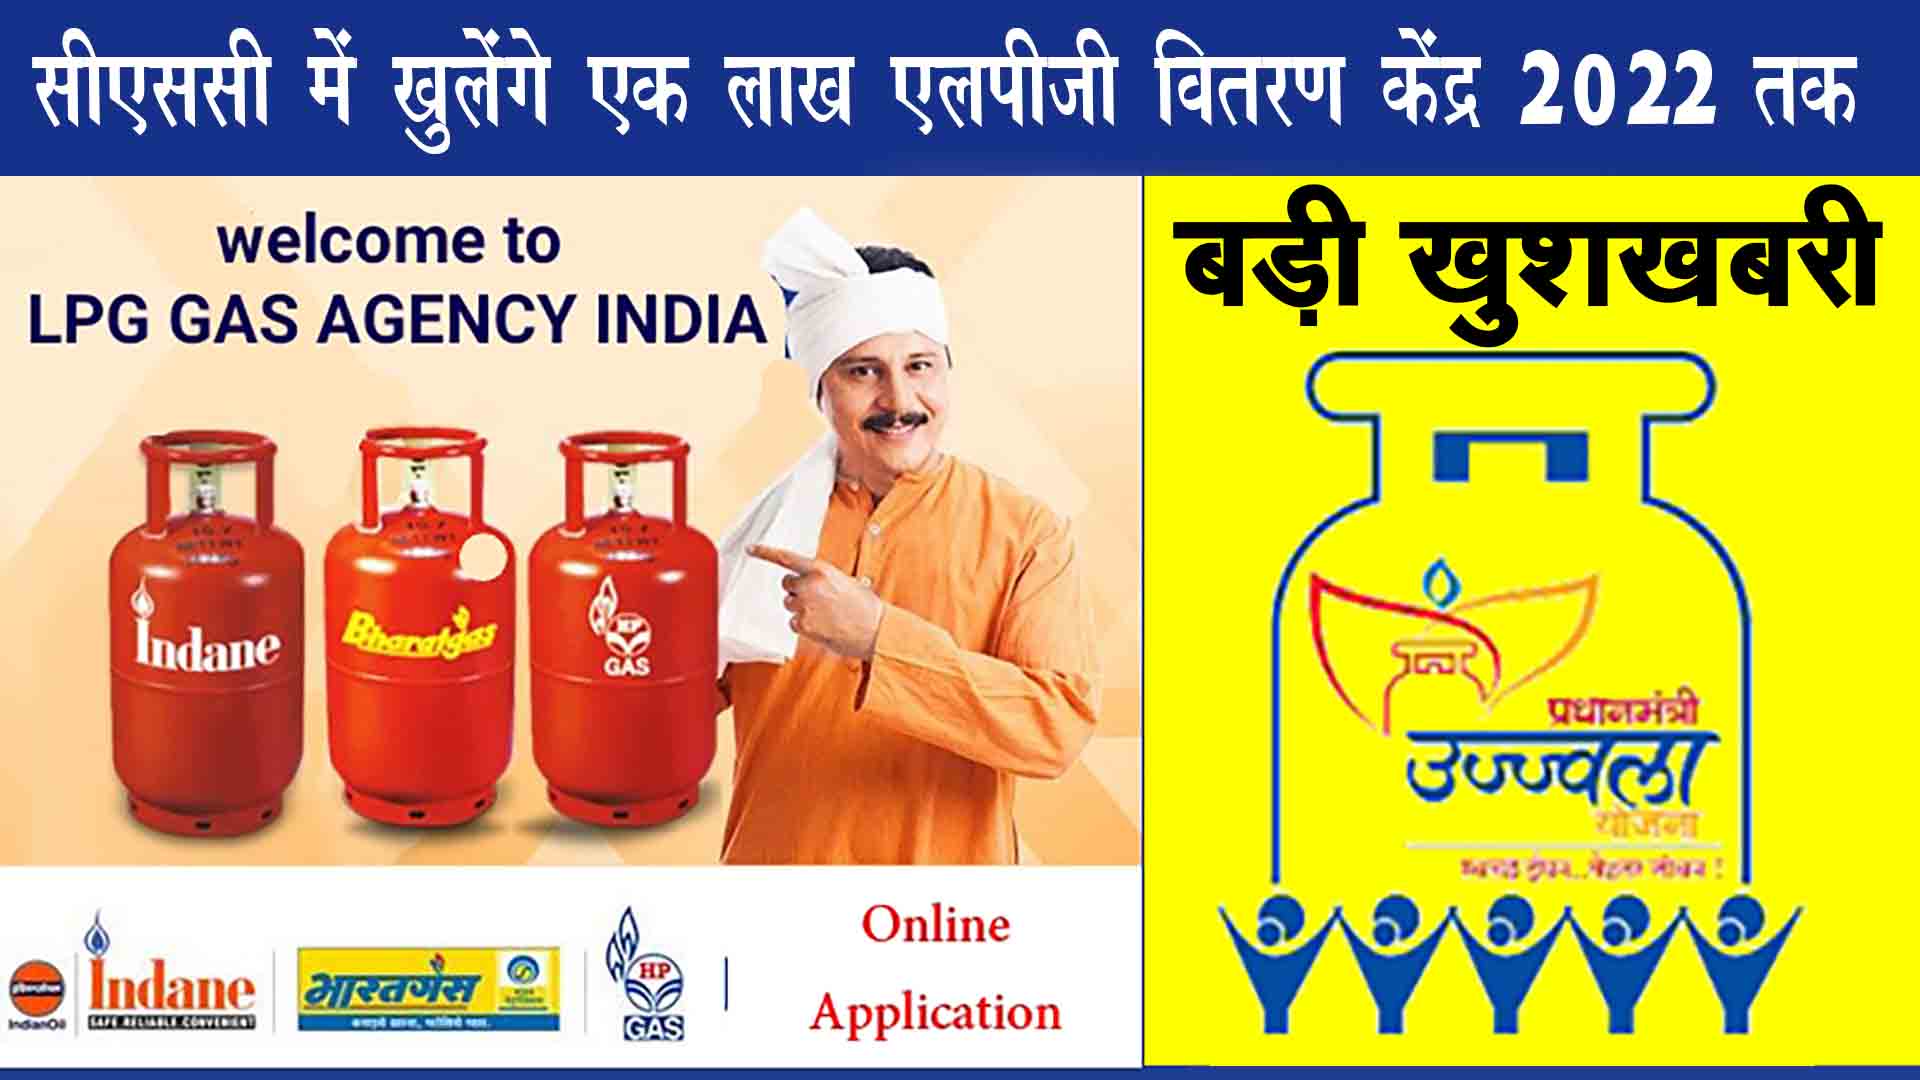 CSC will start 100,000 LPG distribution center. HP, Indian, Bharat Gas distributors will start getting by March 2022